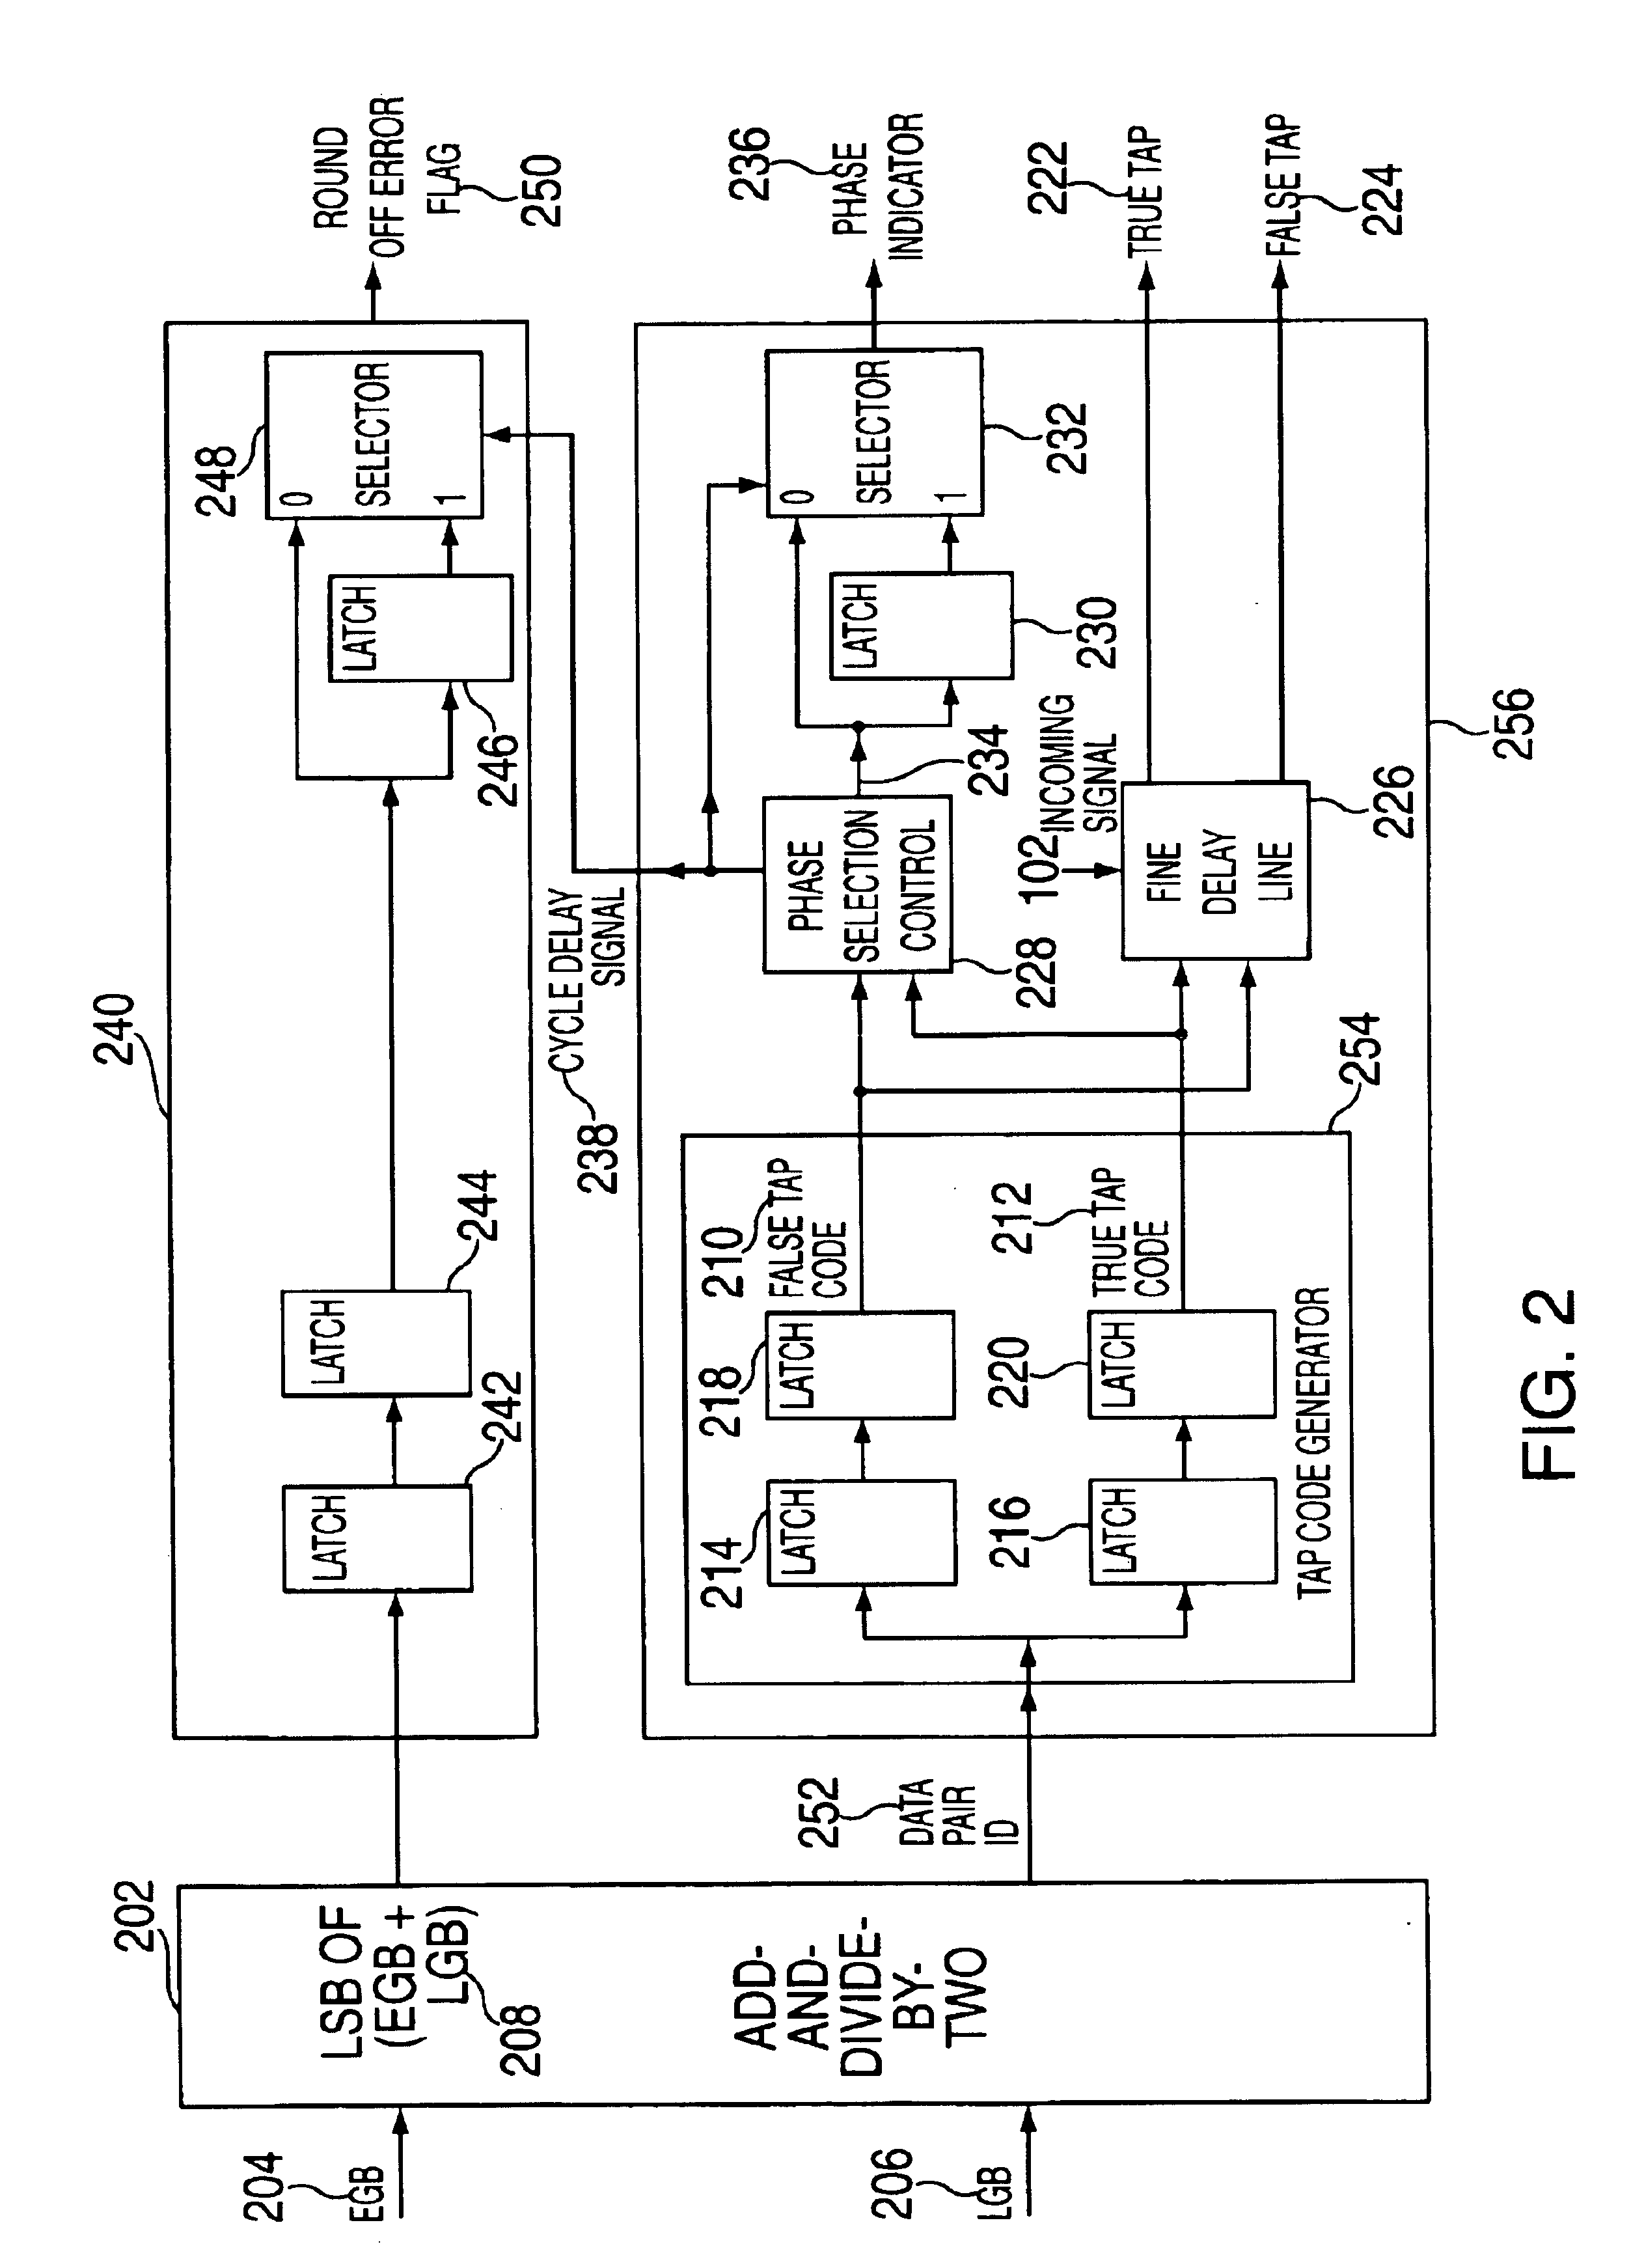 Method and system for selecting data sampling phase for self timed interface logic